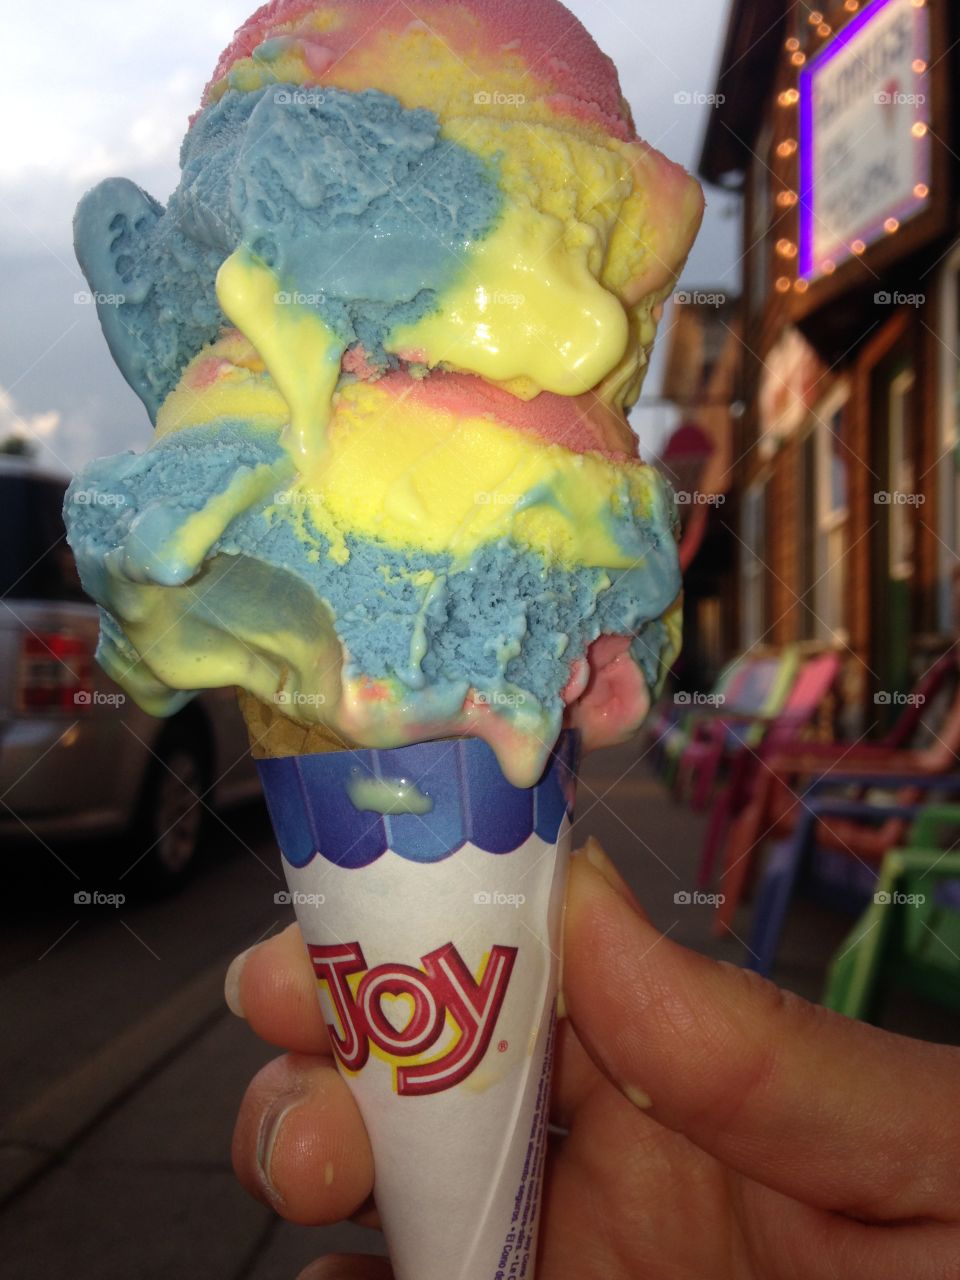 Ice cream in hand!. Superman ice cream cone, sitting outside on summer evening!